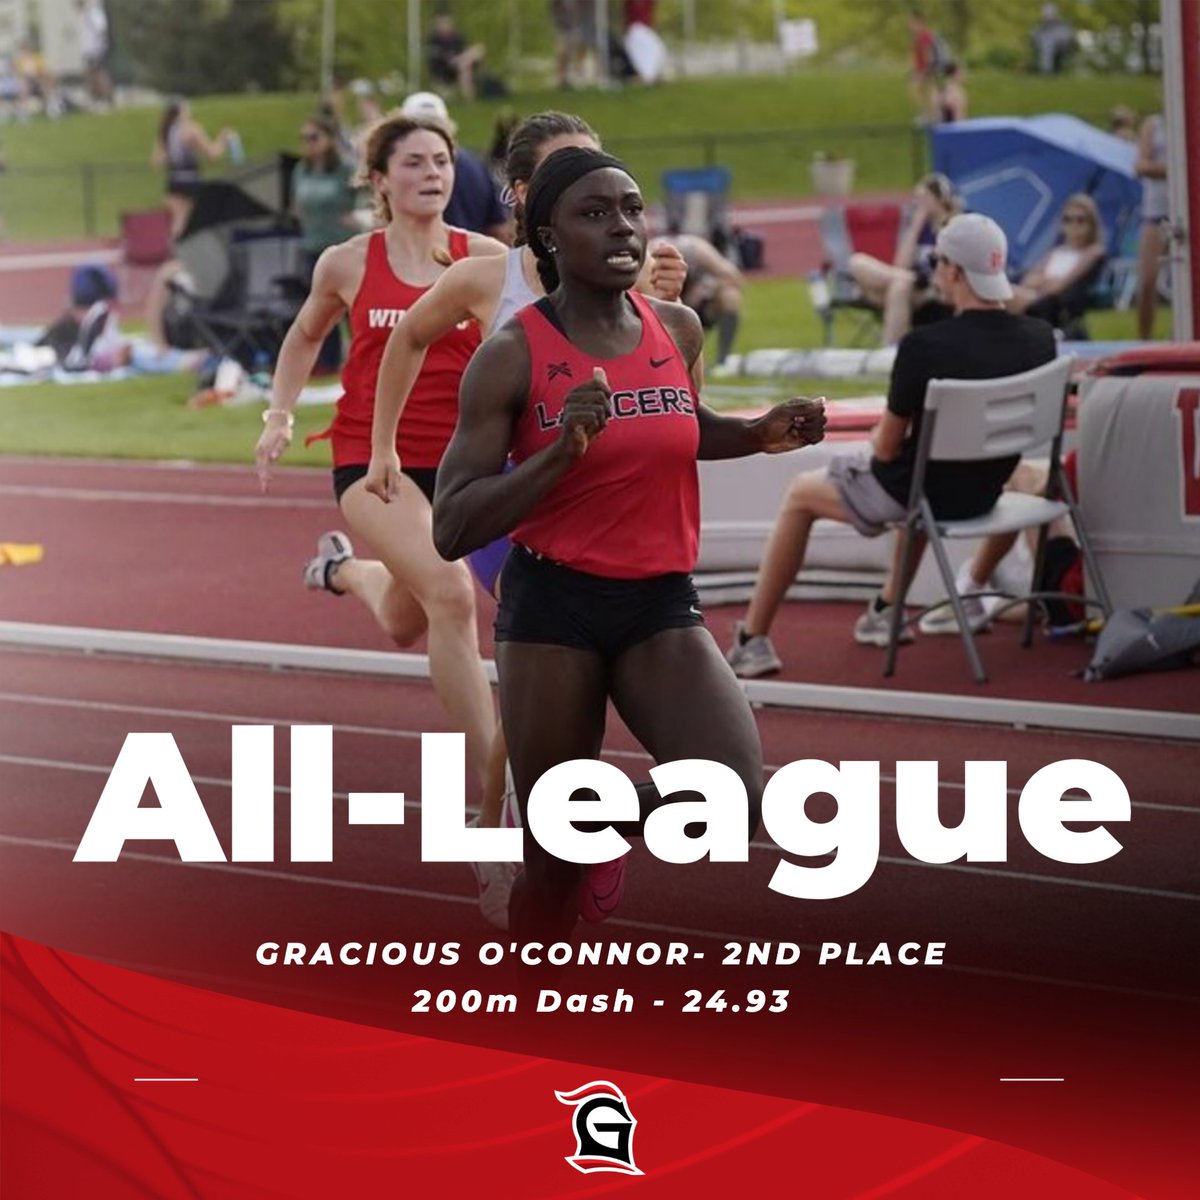 Gracious O'Connor almost breaks her own school record in the 200m dash for a second place finish with a time of 24.93 and All-League status!

#MakeHIMKnown #LancerUp #AllLeague